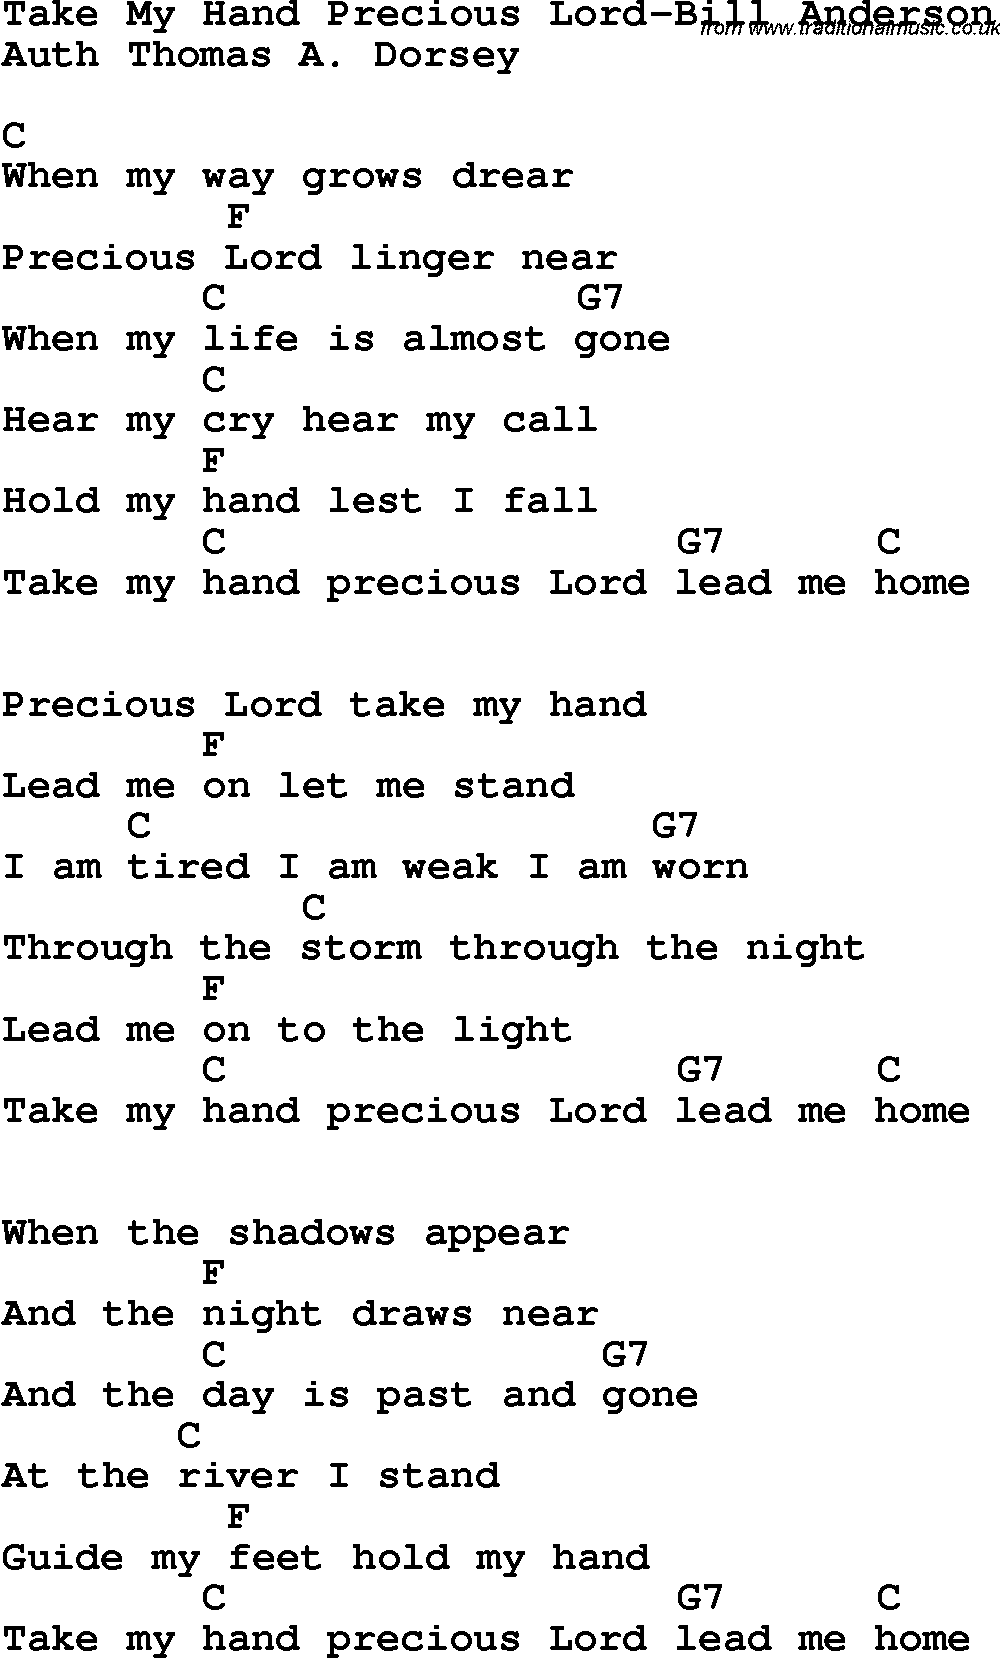 Country, Southern and Bluegrass Gospel Song Take My Hand Precious Lord-Bill Anderson lyrics and chords